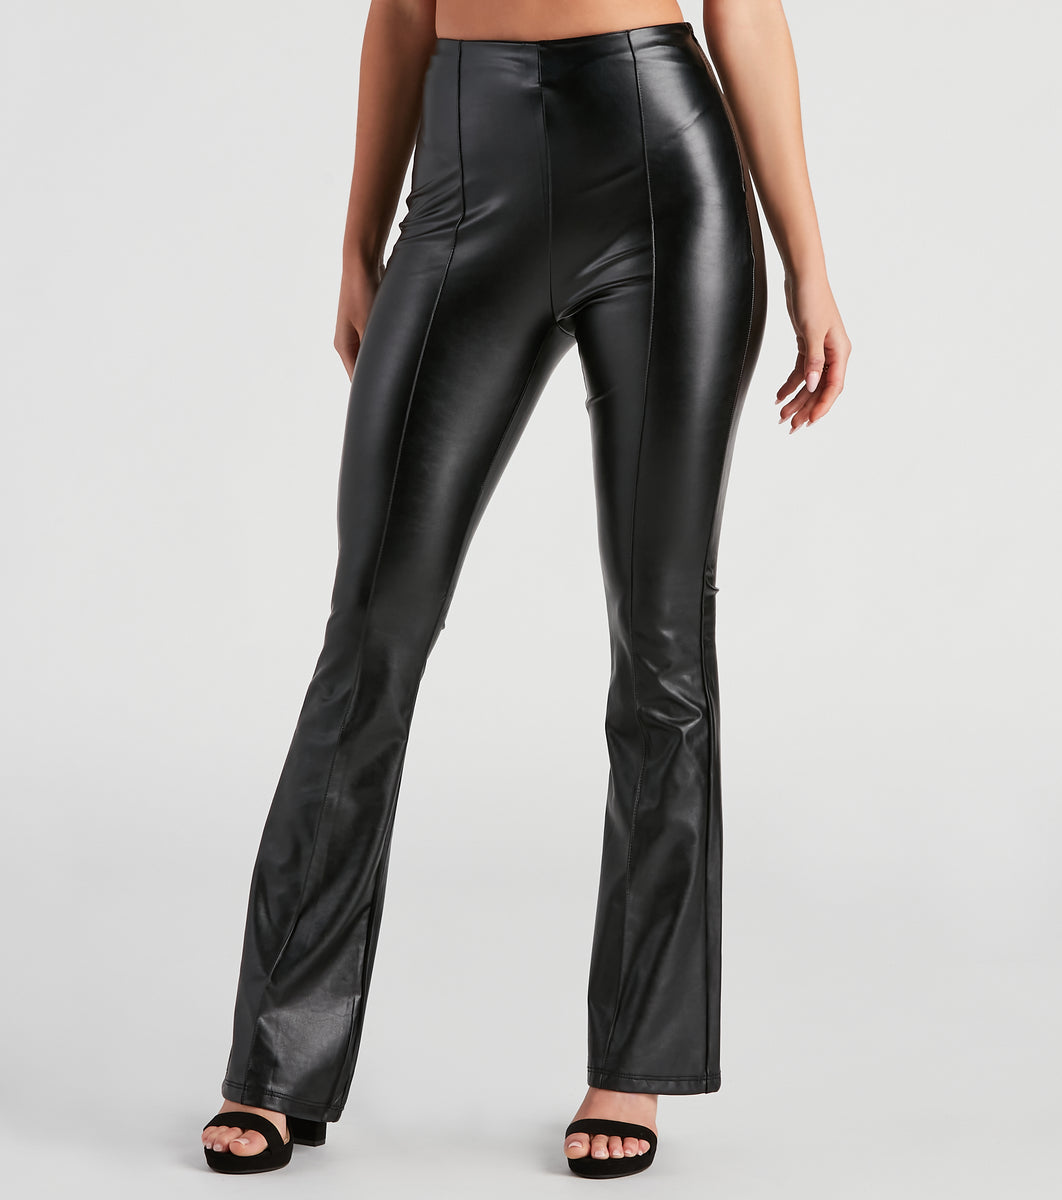 Shinestar High Rise Faux Leather Flare Pant - Women's